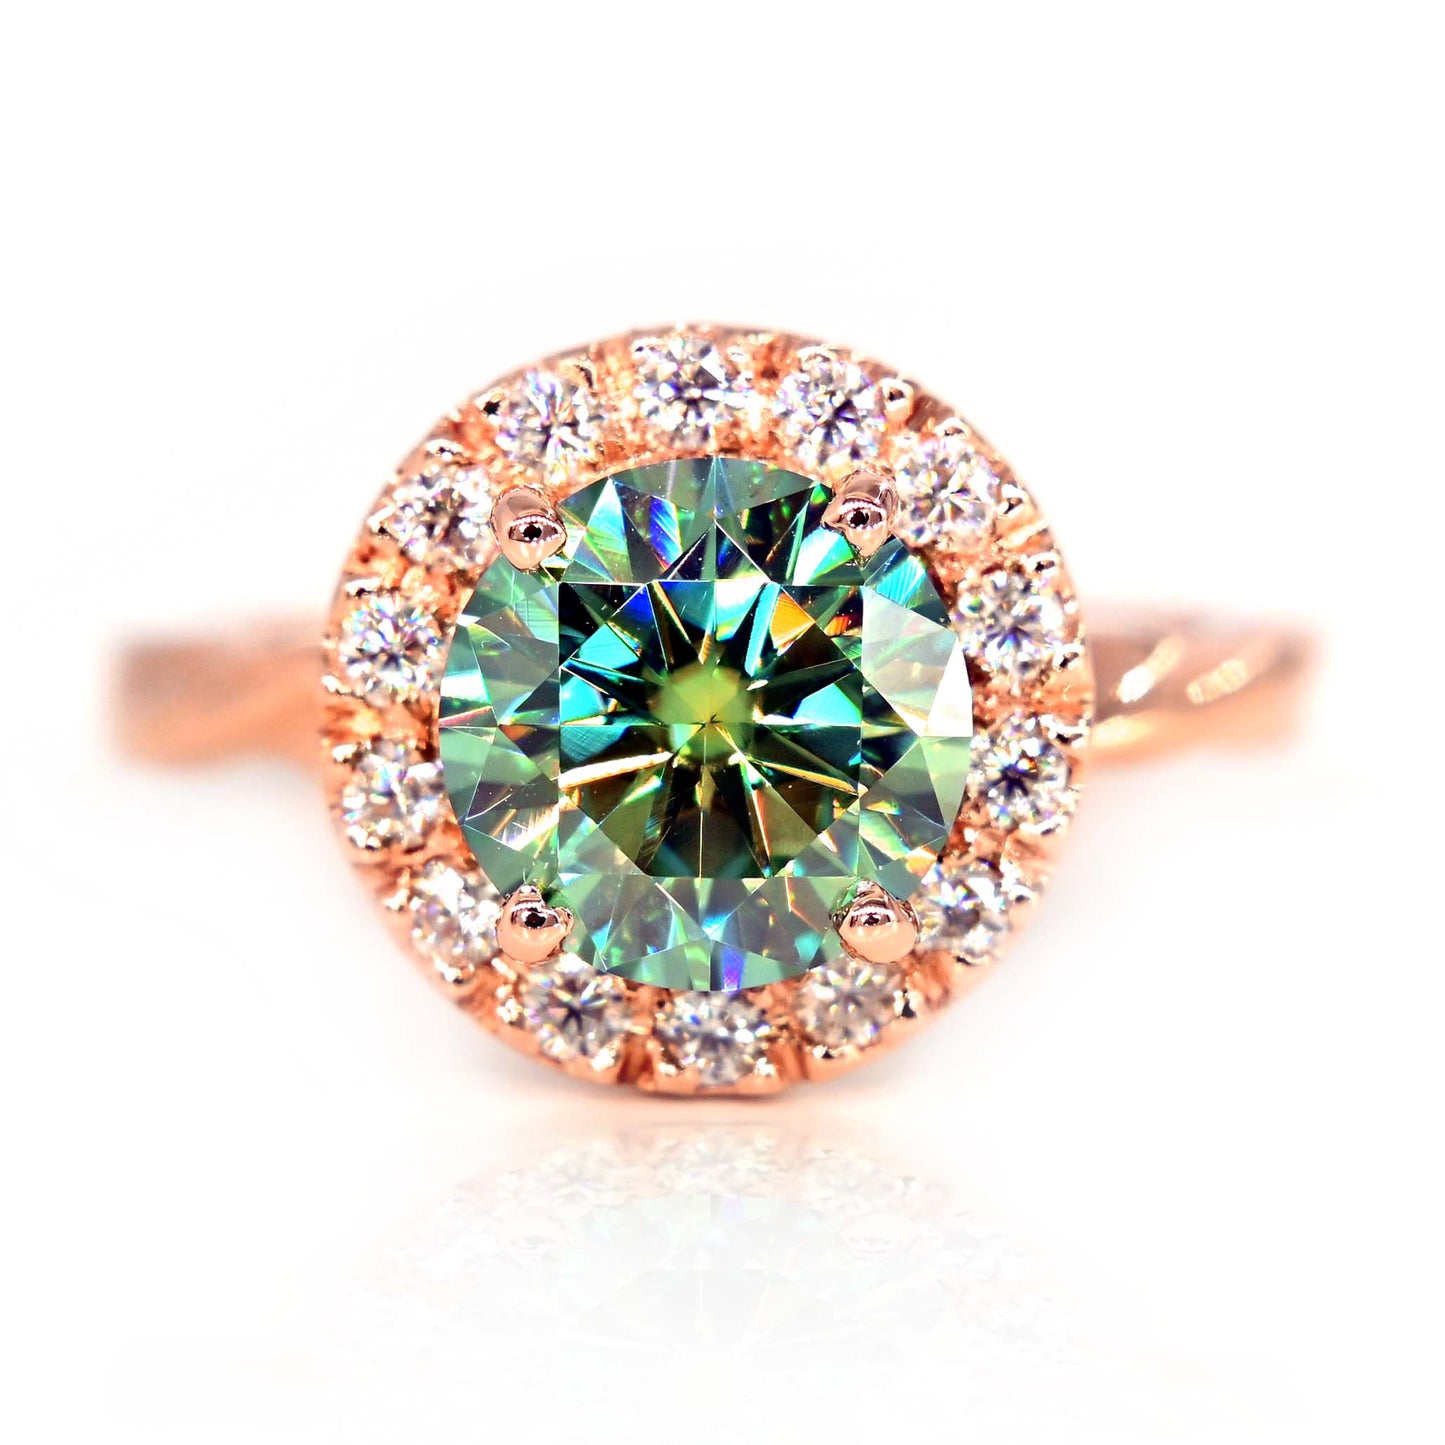 Stunning engagement ring made with 14k rose gold and teal moissanite. Made in Chiang Mai, Thailand and delivered worldwide!